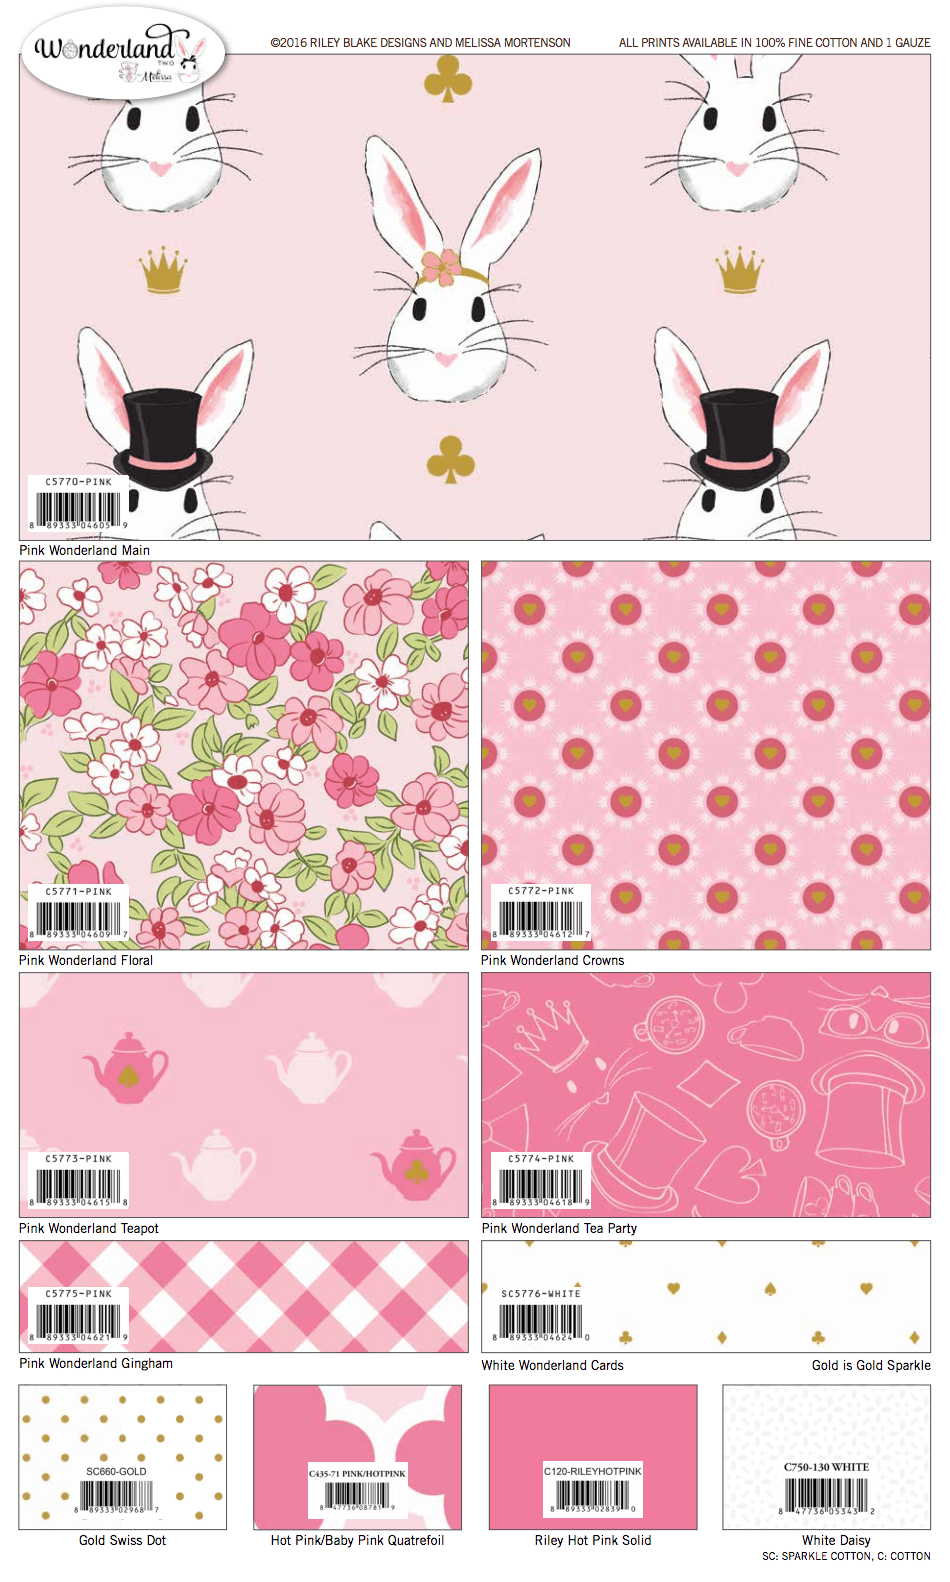 Wonderland Two Fabric by Melissa Mortenson from Riley Blake Designs, coming in January 2017!